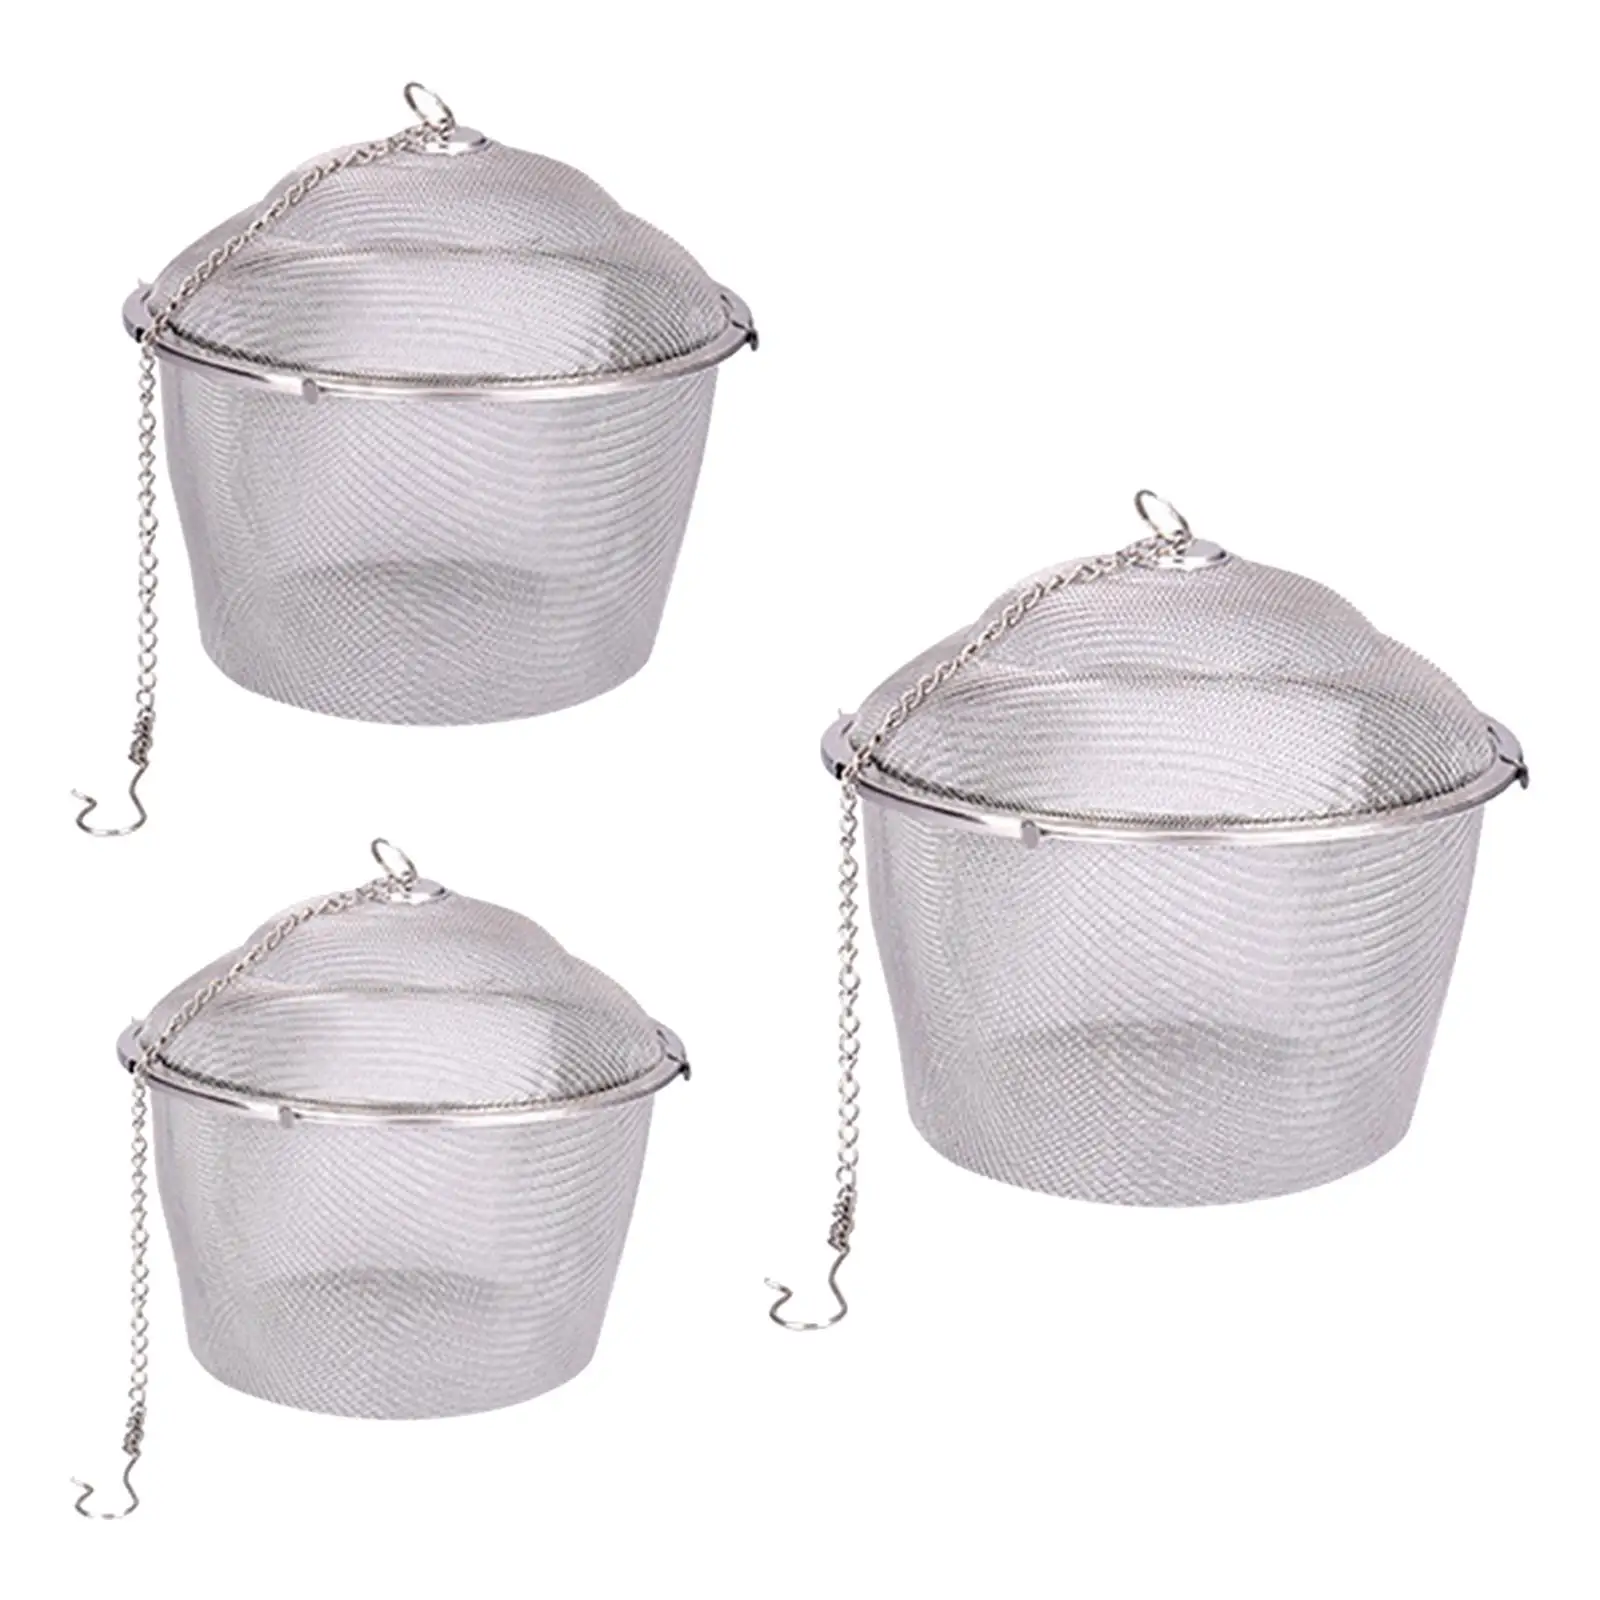 Stainless Steel Tea Infuser Kitchen Tool with Chain Hook for Seasonings